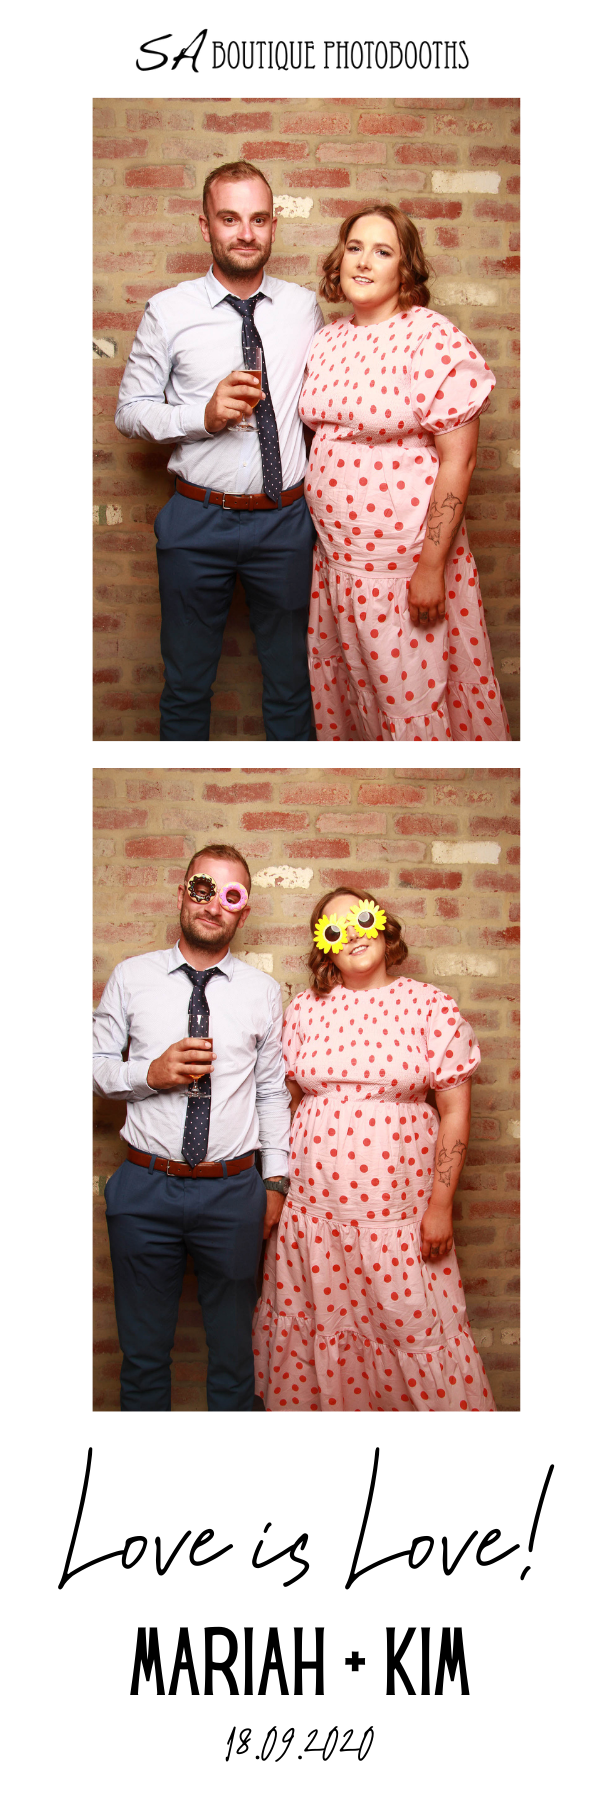 adelaide photobooth hire